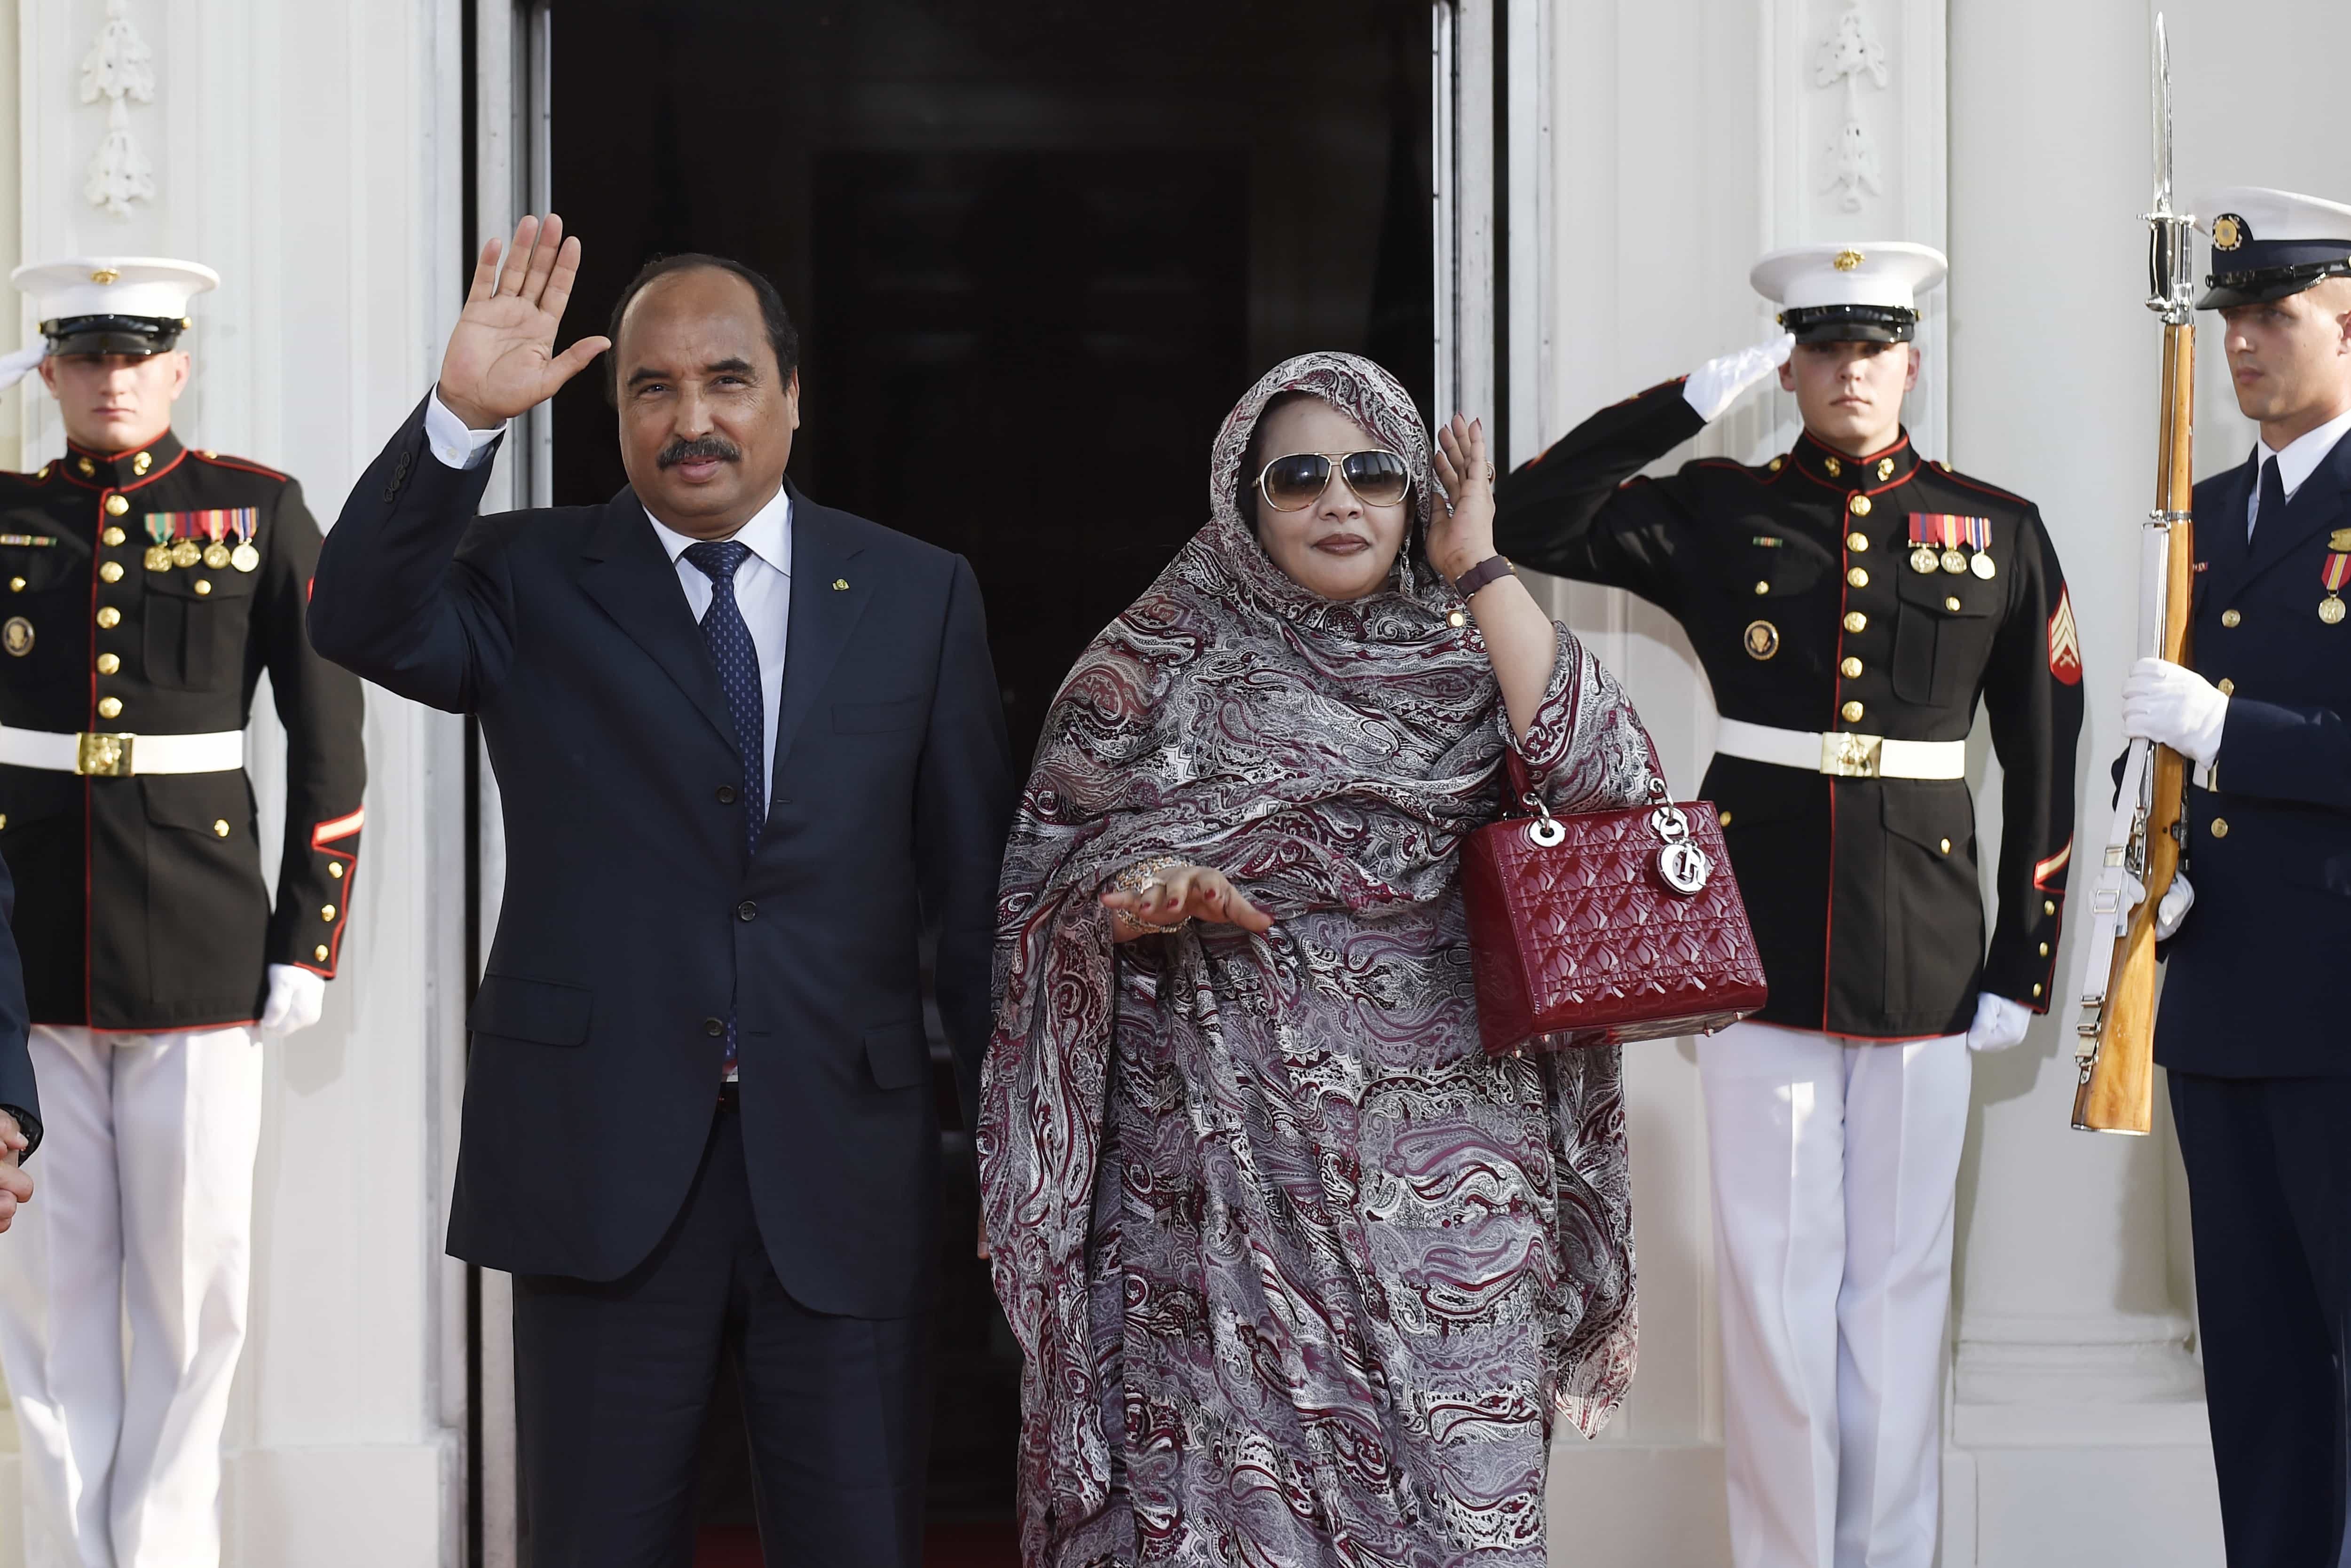 President Mohamed Ould Abdel Aziz of Mauritania and his wife Lady Tekber Mint Melainine Ould Ahmed wave on the North Portico of the White House in Washington, 5 August 2014, AP Photo/Susan Walsh